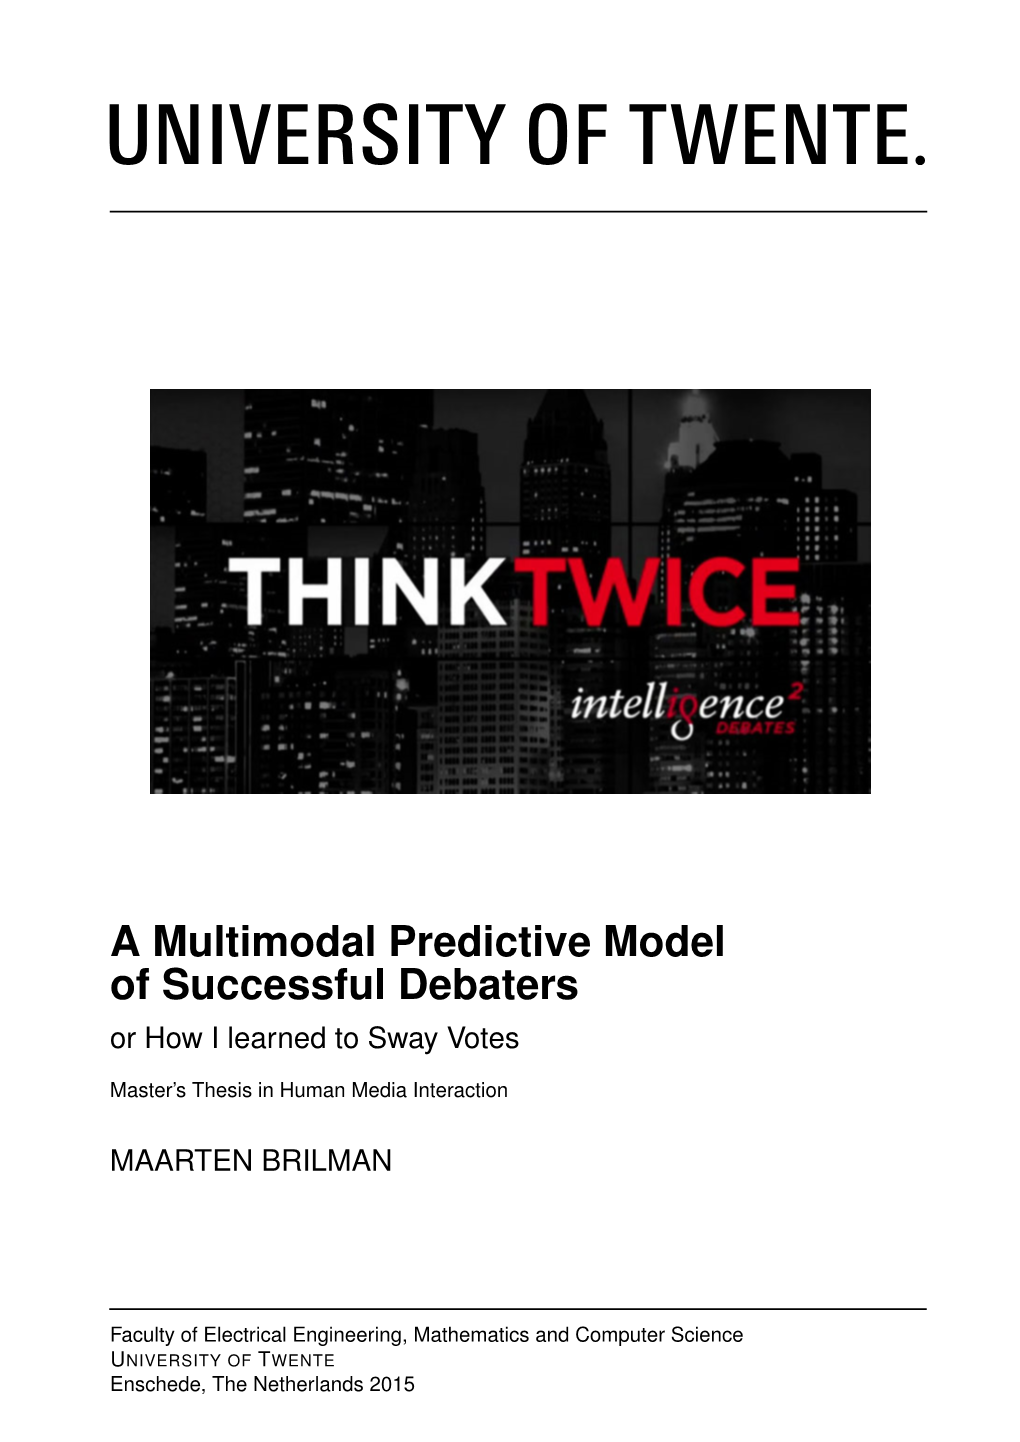 A Multimodal Predictive Model of Successful Debaters Or How I Learned to Sway Votes